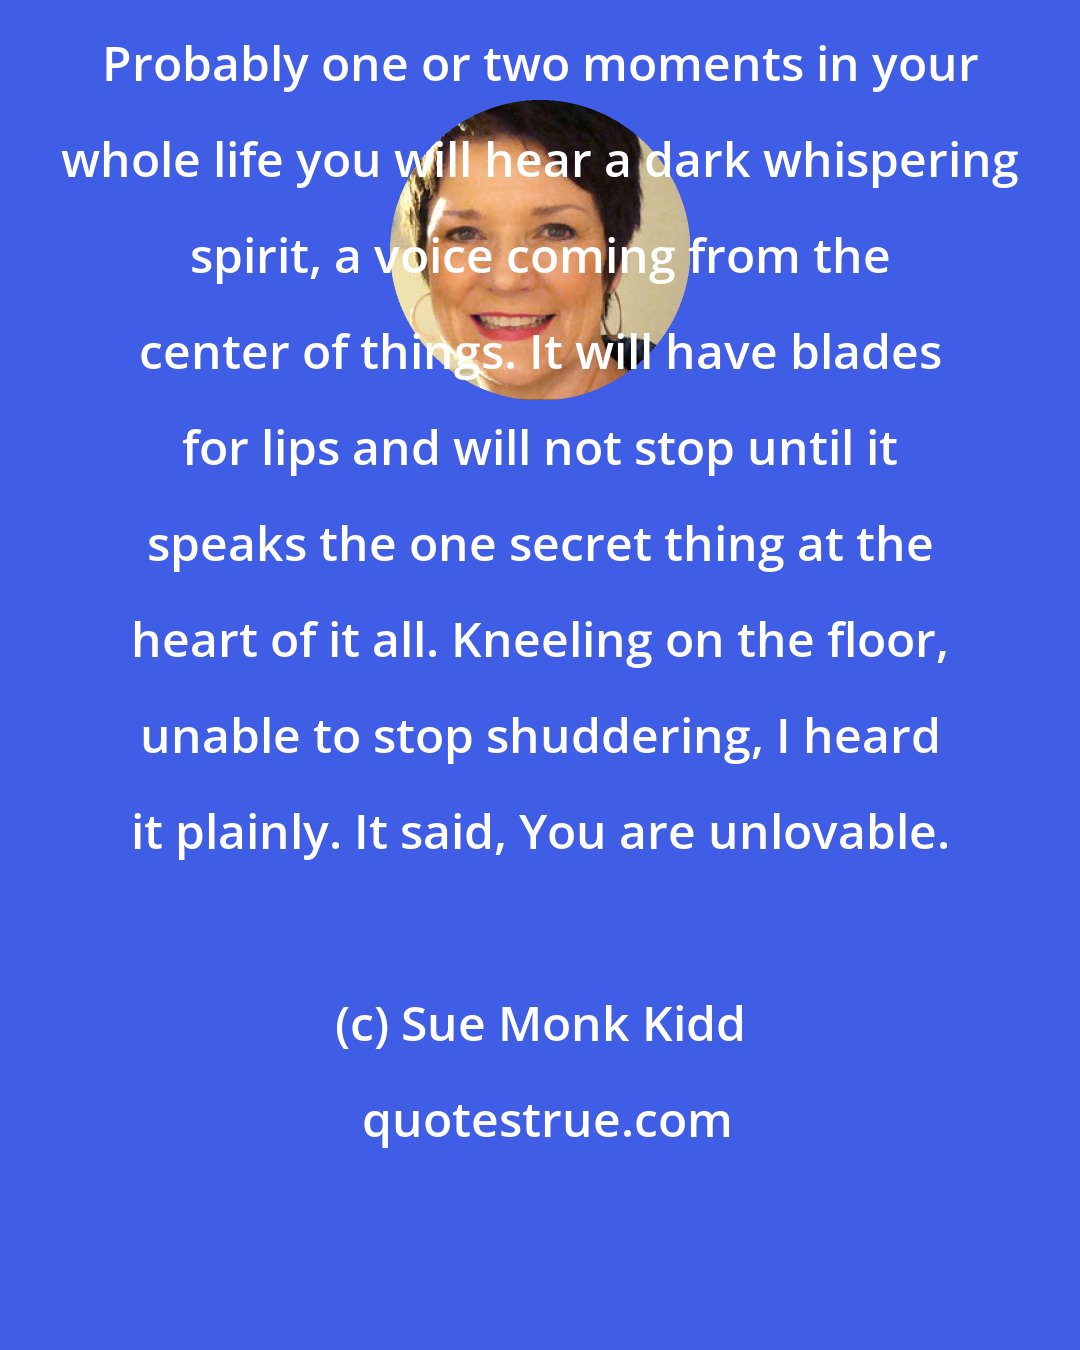 Sue Monk Kidd: Probably one or two moments in your whole life you will hear a dark whispering spirit, a voice coming from the center of things. It will have blades for lips and will not stop until it speaks the one secret thing at the heart of it all. Kneeling on the floor, unable to stop shuddering, I heard it plainly. It said, You are unlovable.